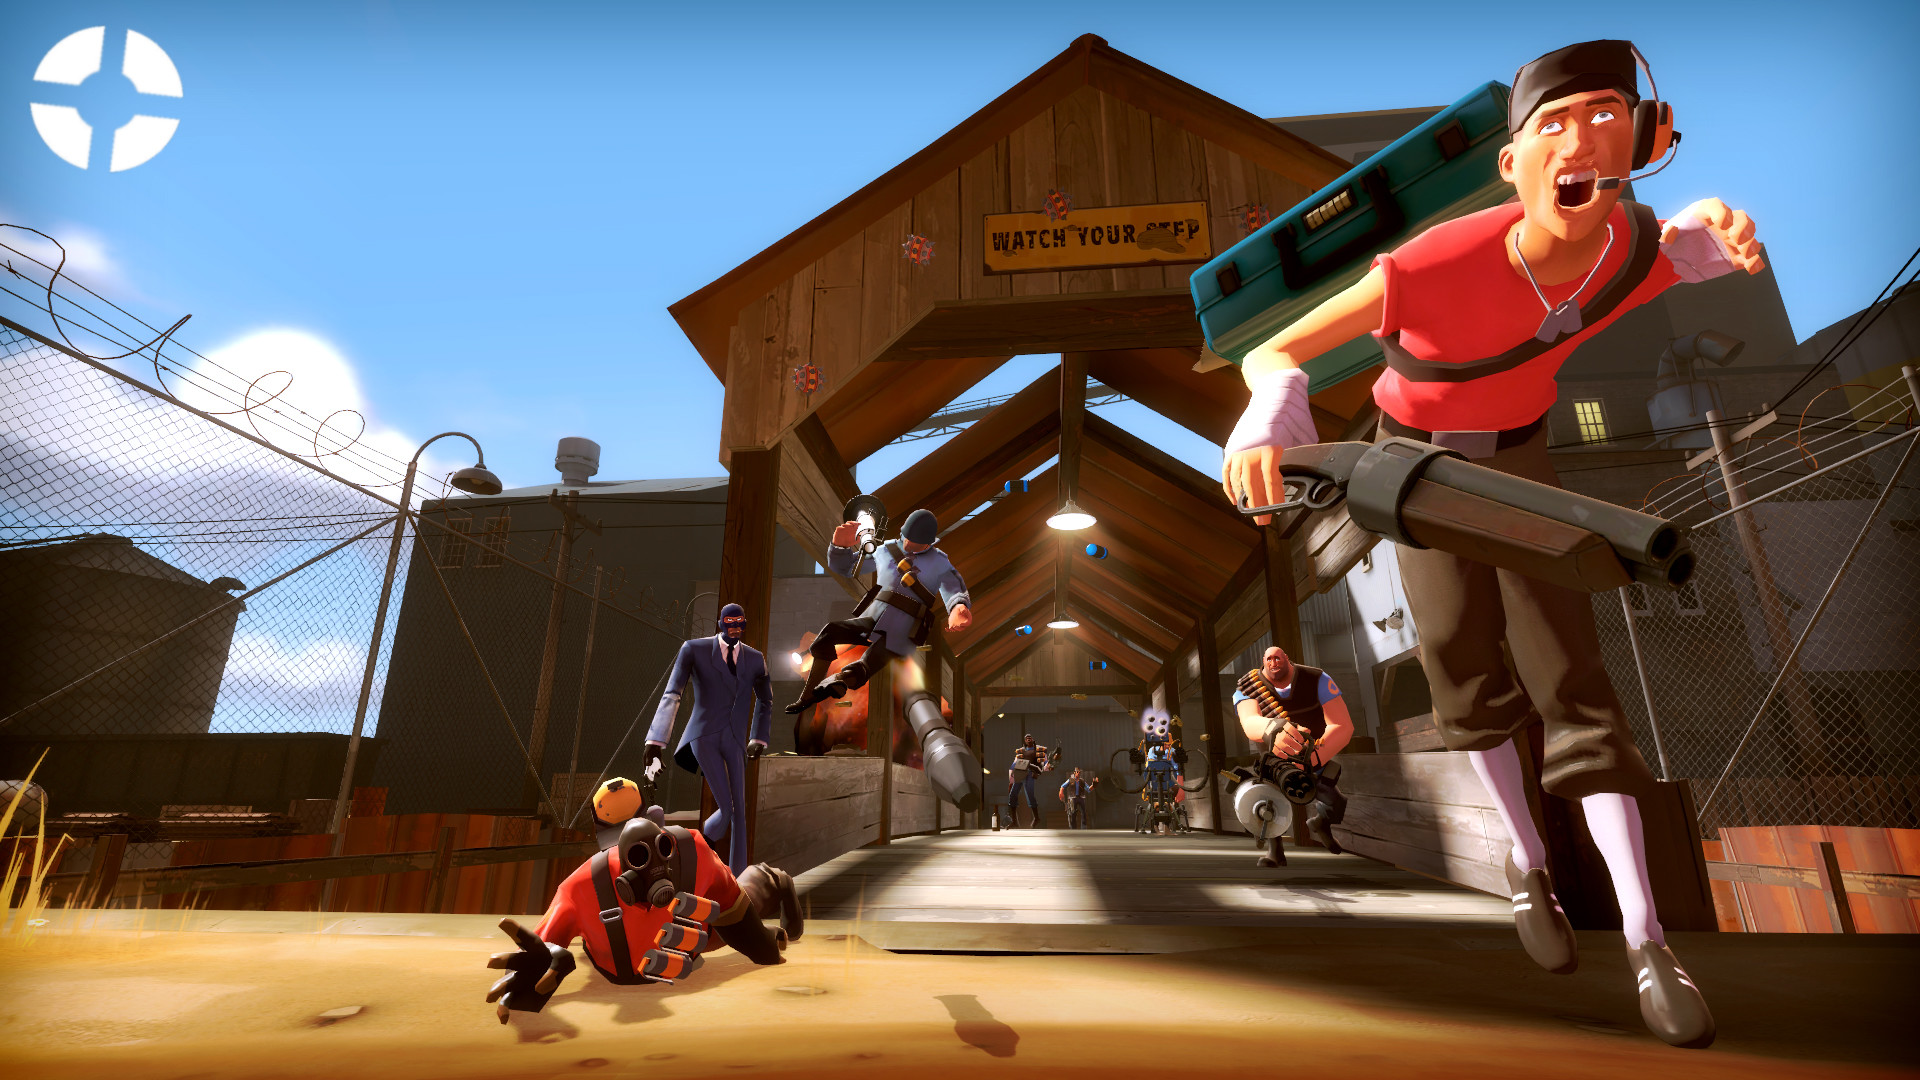 1920x1080 First Ever TF2 Wallpaper I've made using Garrys Mod. Opinions?